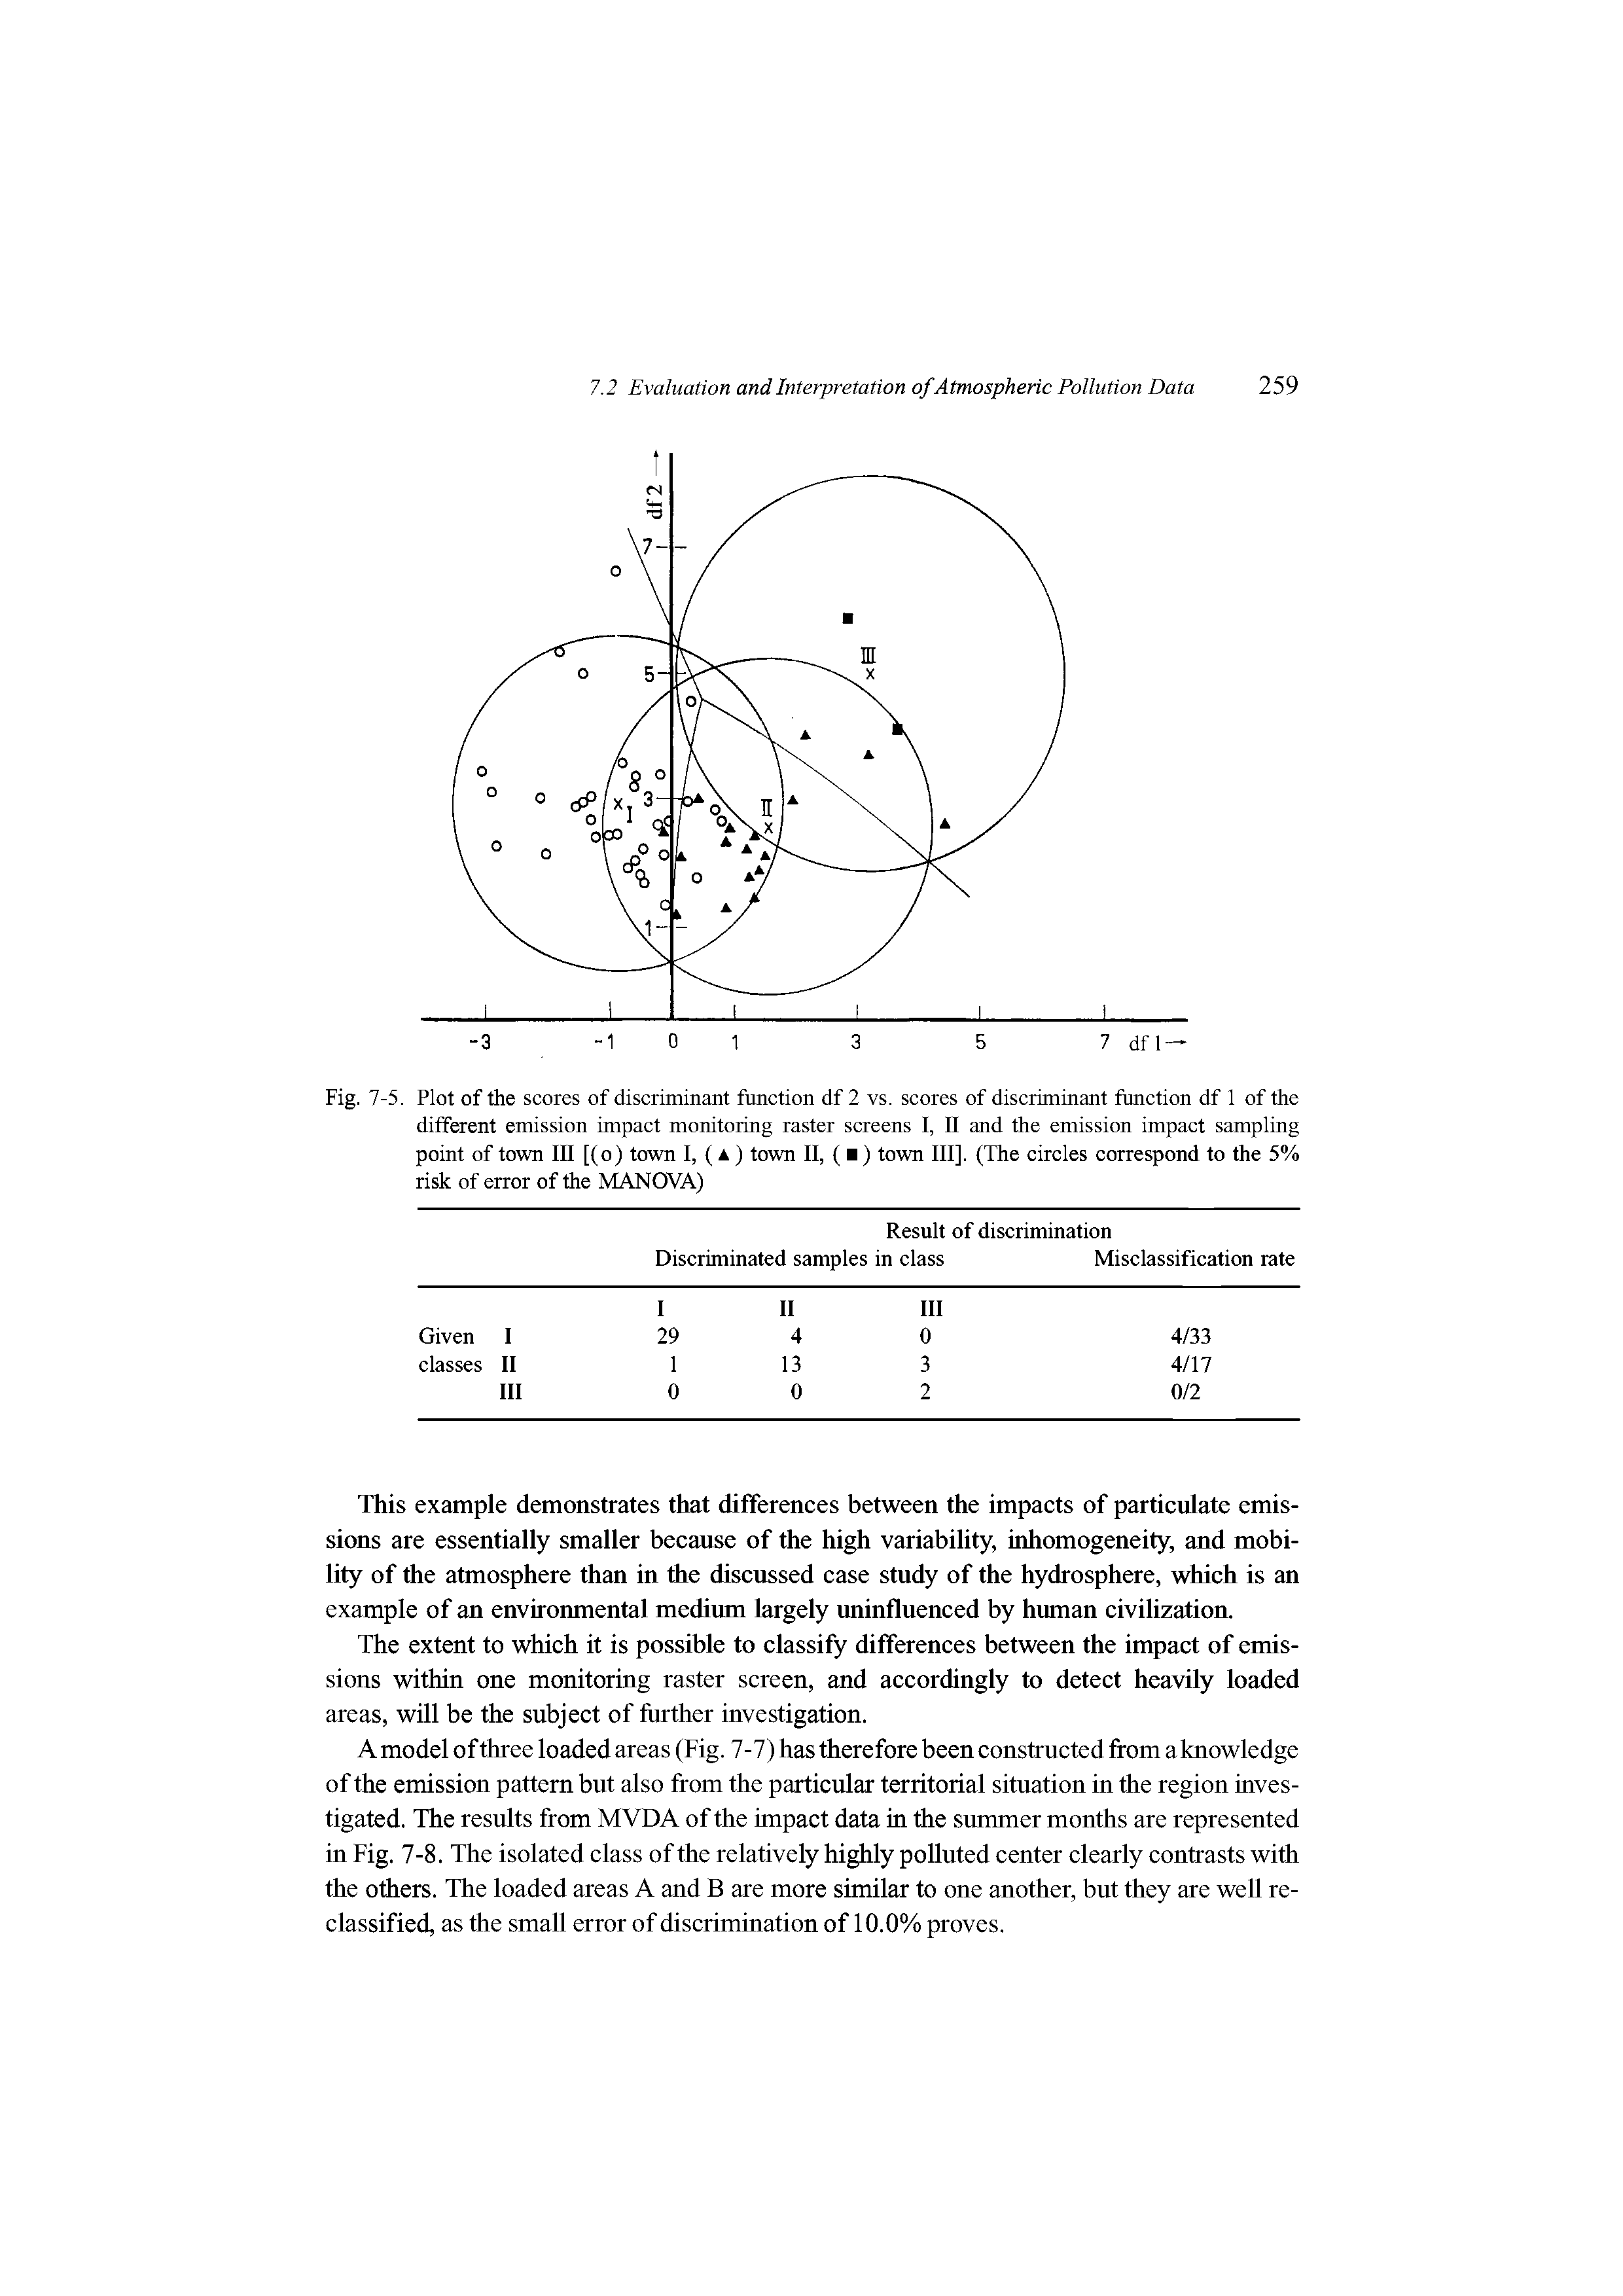 Fig. 7-5. Plot of the scores of discriminant function df 2 vs. scores of discriminant function df 1 of the different emission impact monitoring raster screens I, II and the emission impact sampling point of town III [(o) town I, ( ) town II, ( ) town III], (The circles correspond to the 5% risk of error of the MANOVA)...